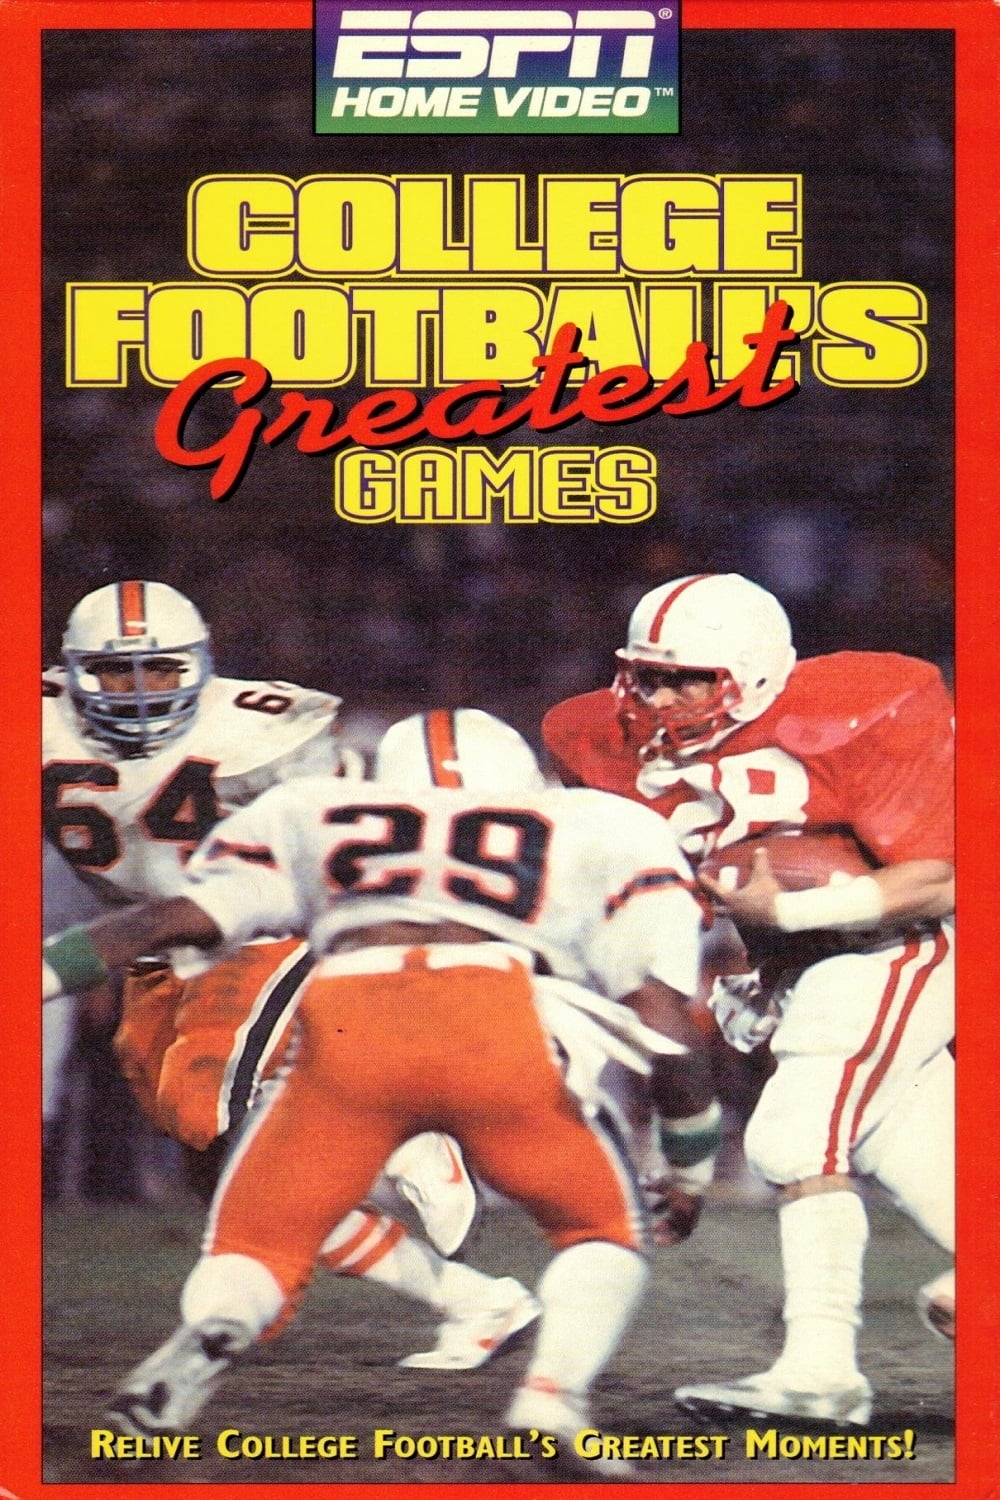 College Football's Greatest Games